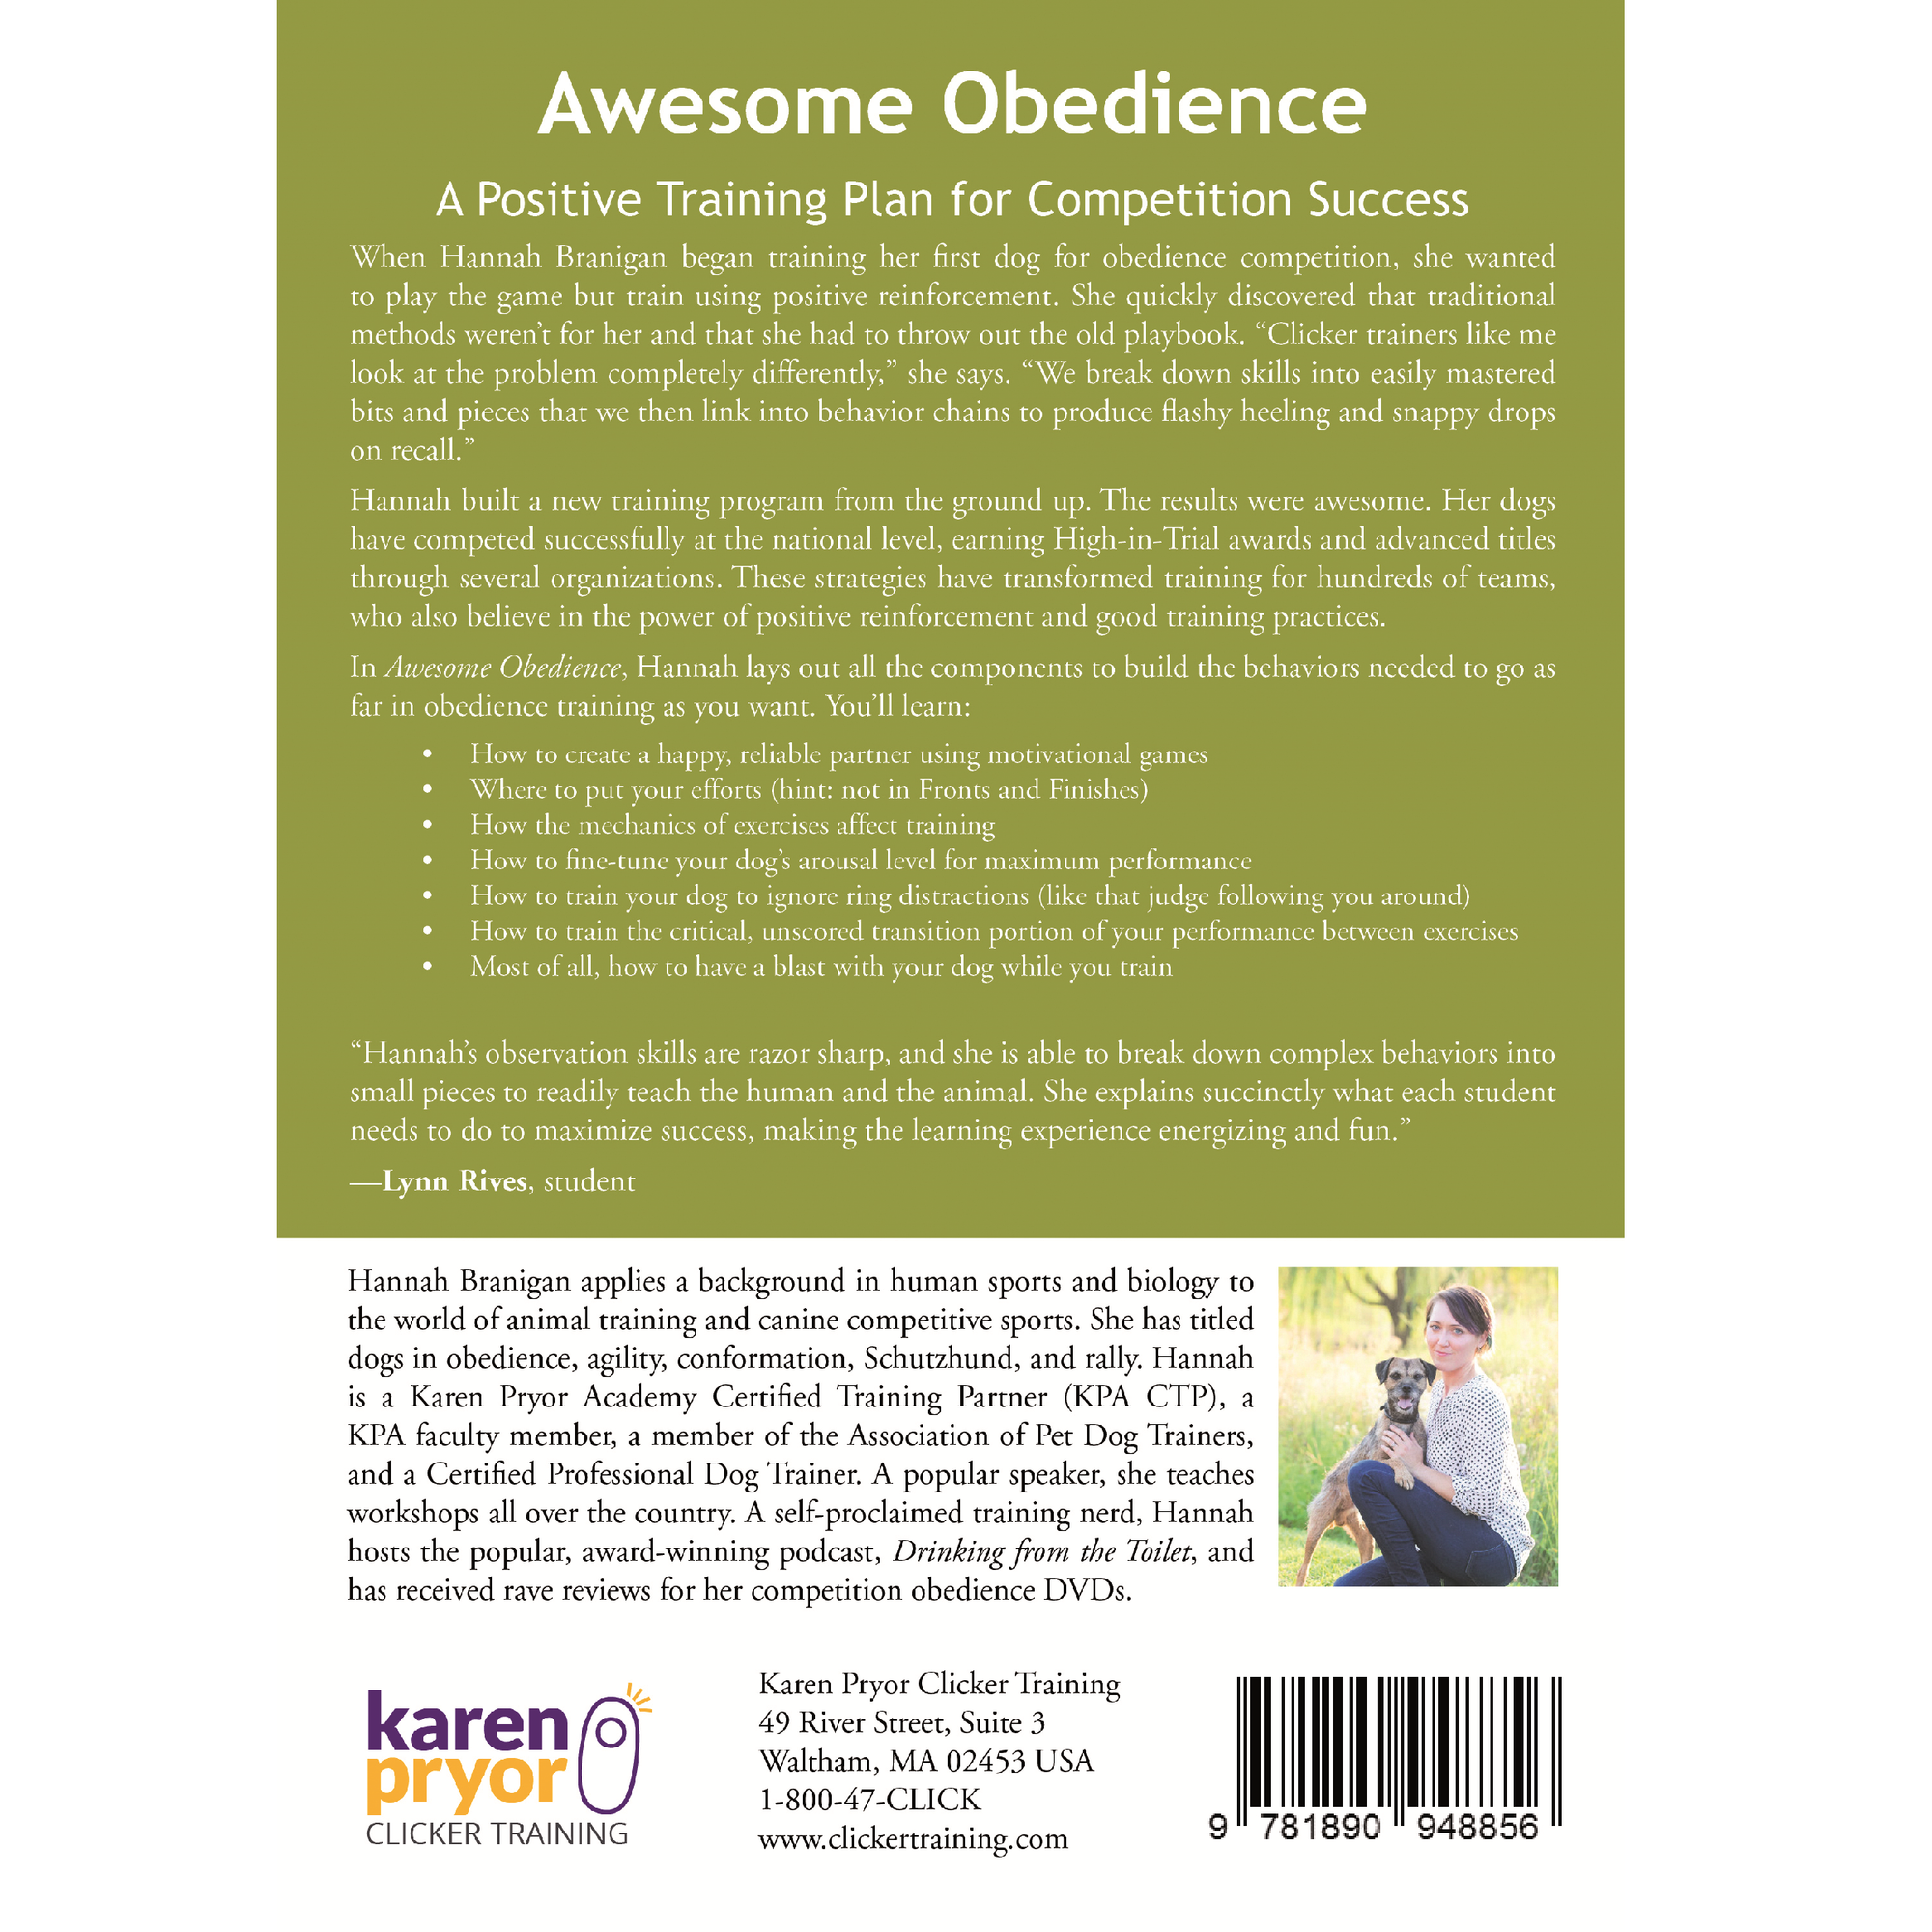 Awesome Obedience: A Positive Training Plan for Competition Success